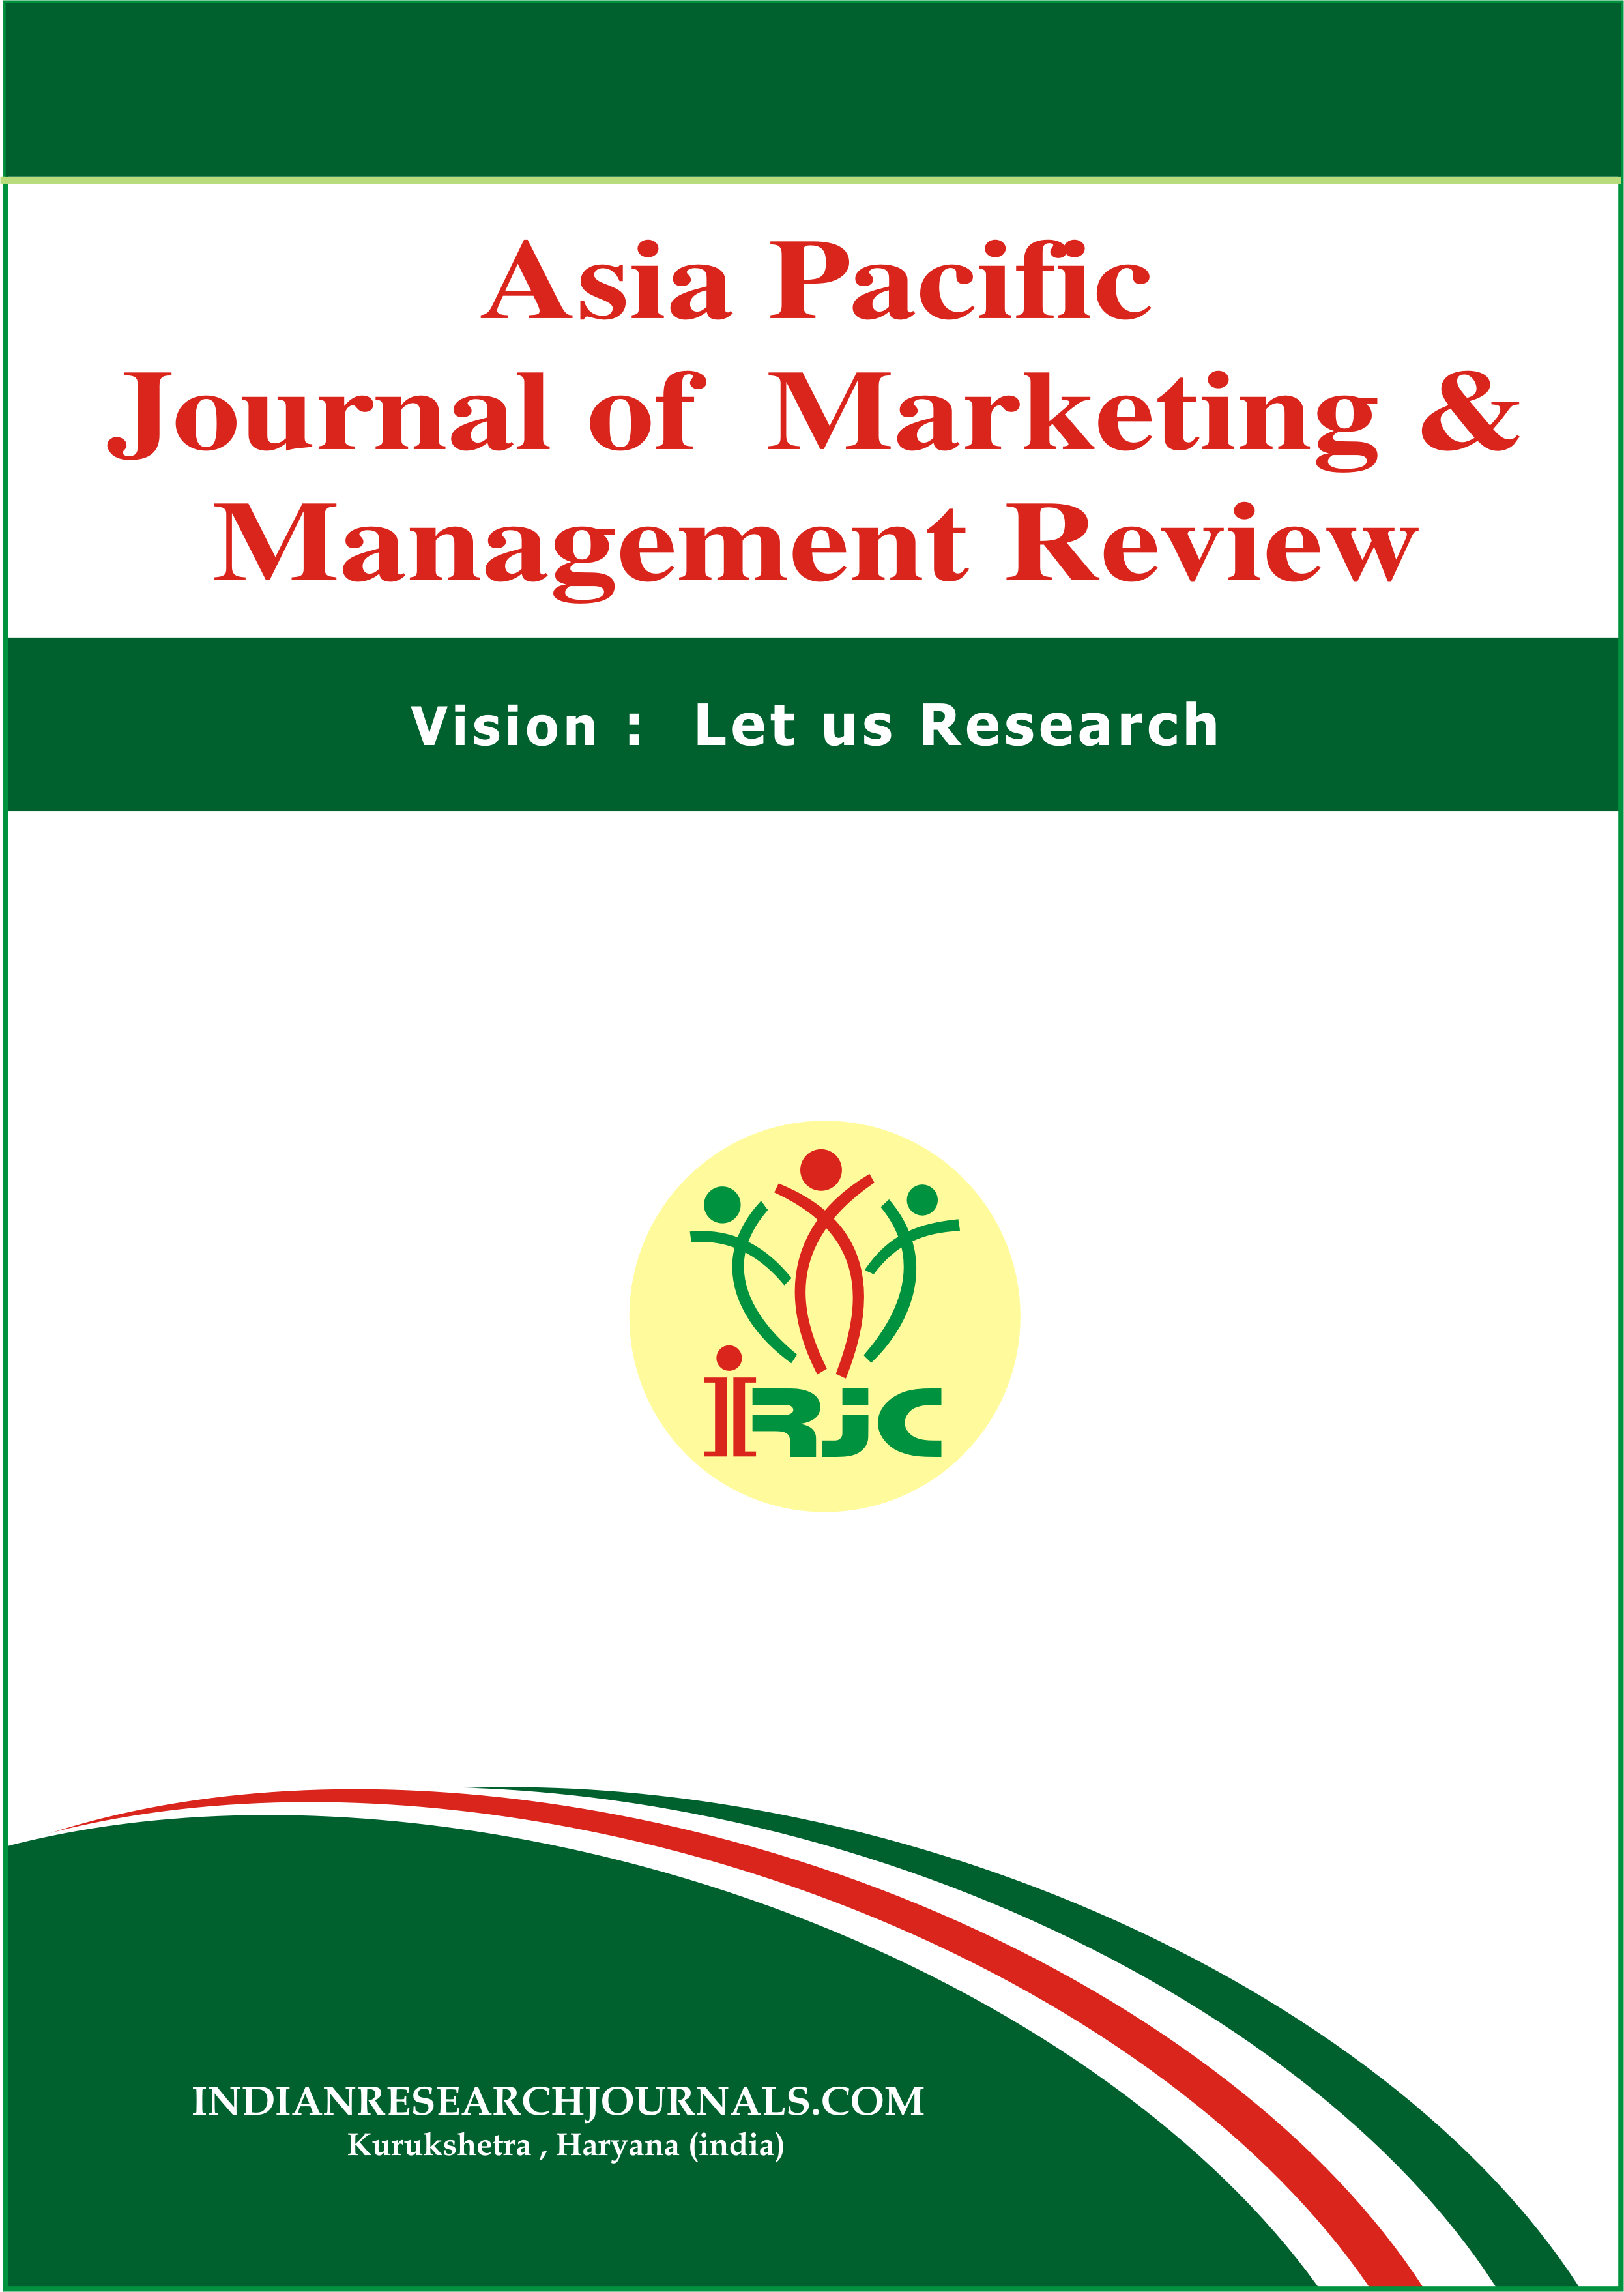 					Visualizza V. 11 N. 06 (2022): ASIA PACIFIC JOURNAL OF MARKETING & MANAGEMENT REVIEW
				